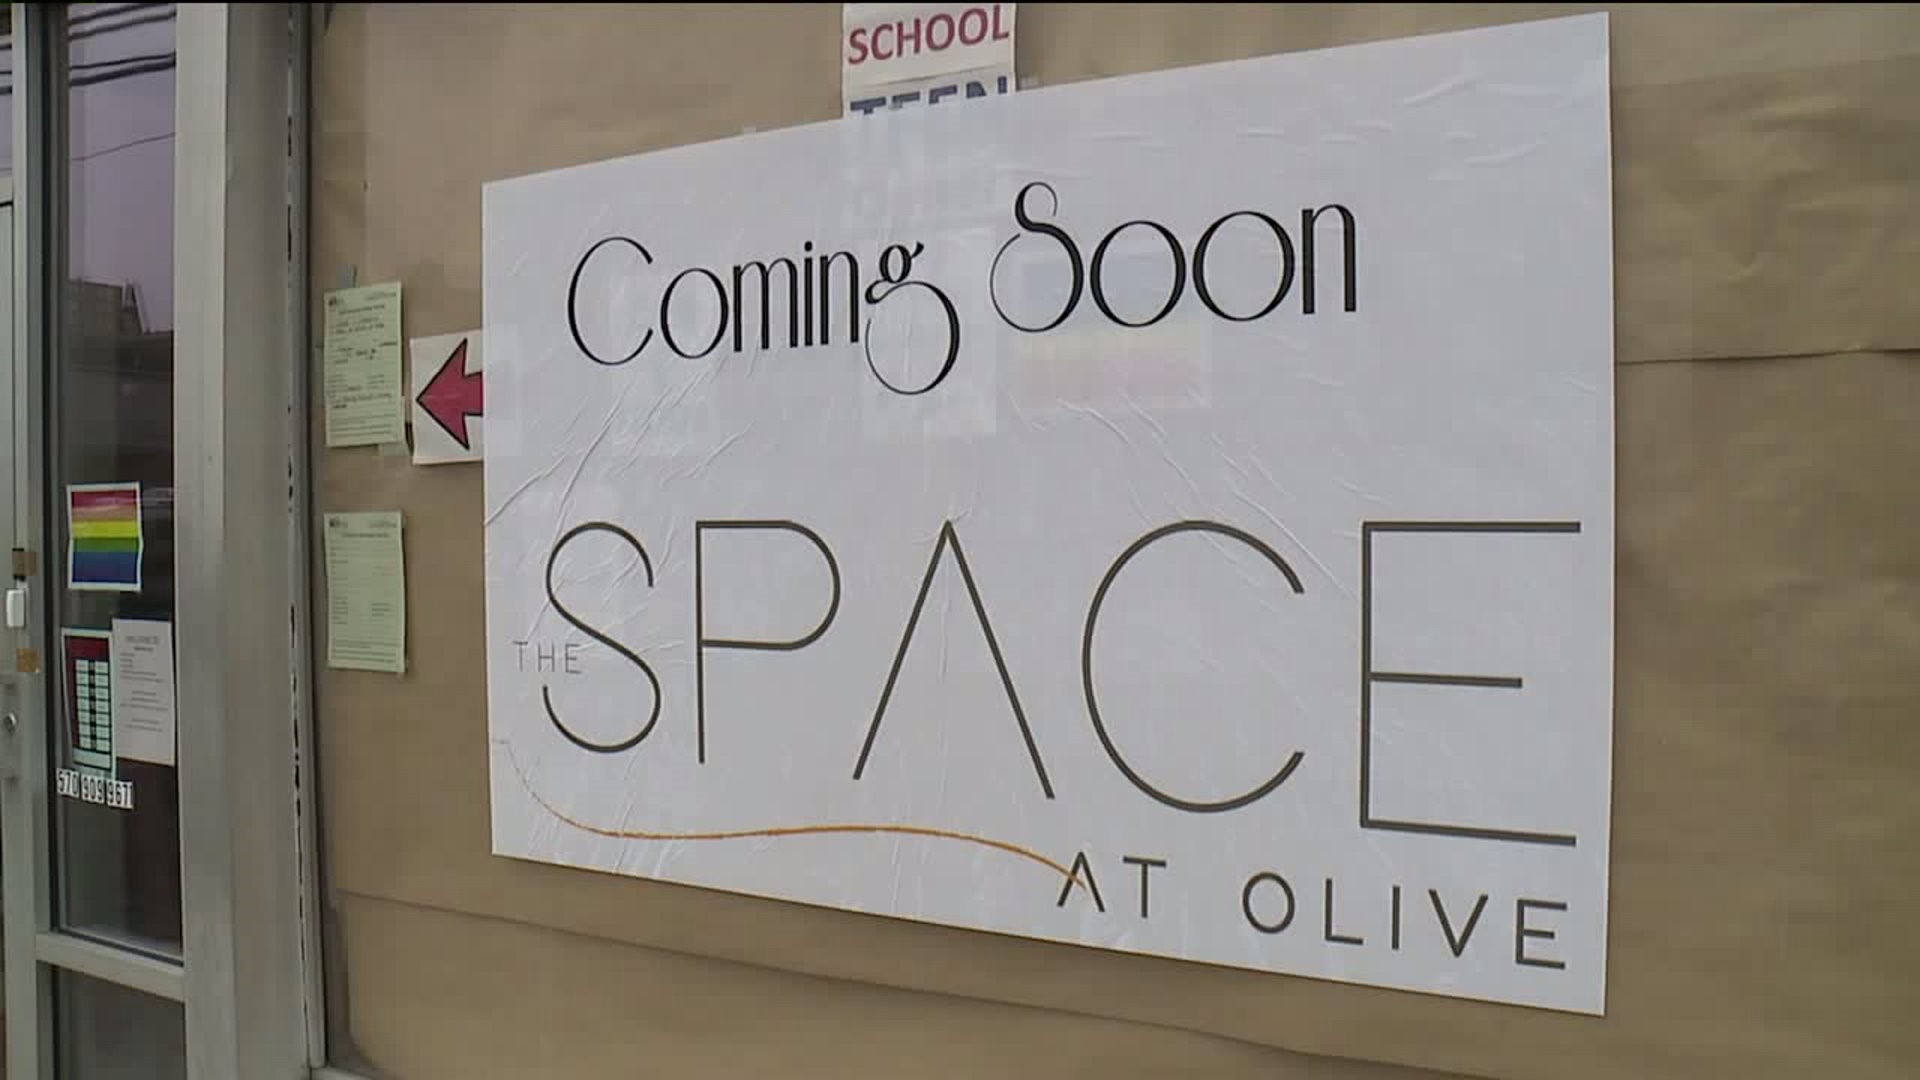 `The Space at Olive` - Nonprofit Plans Event Space